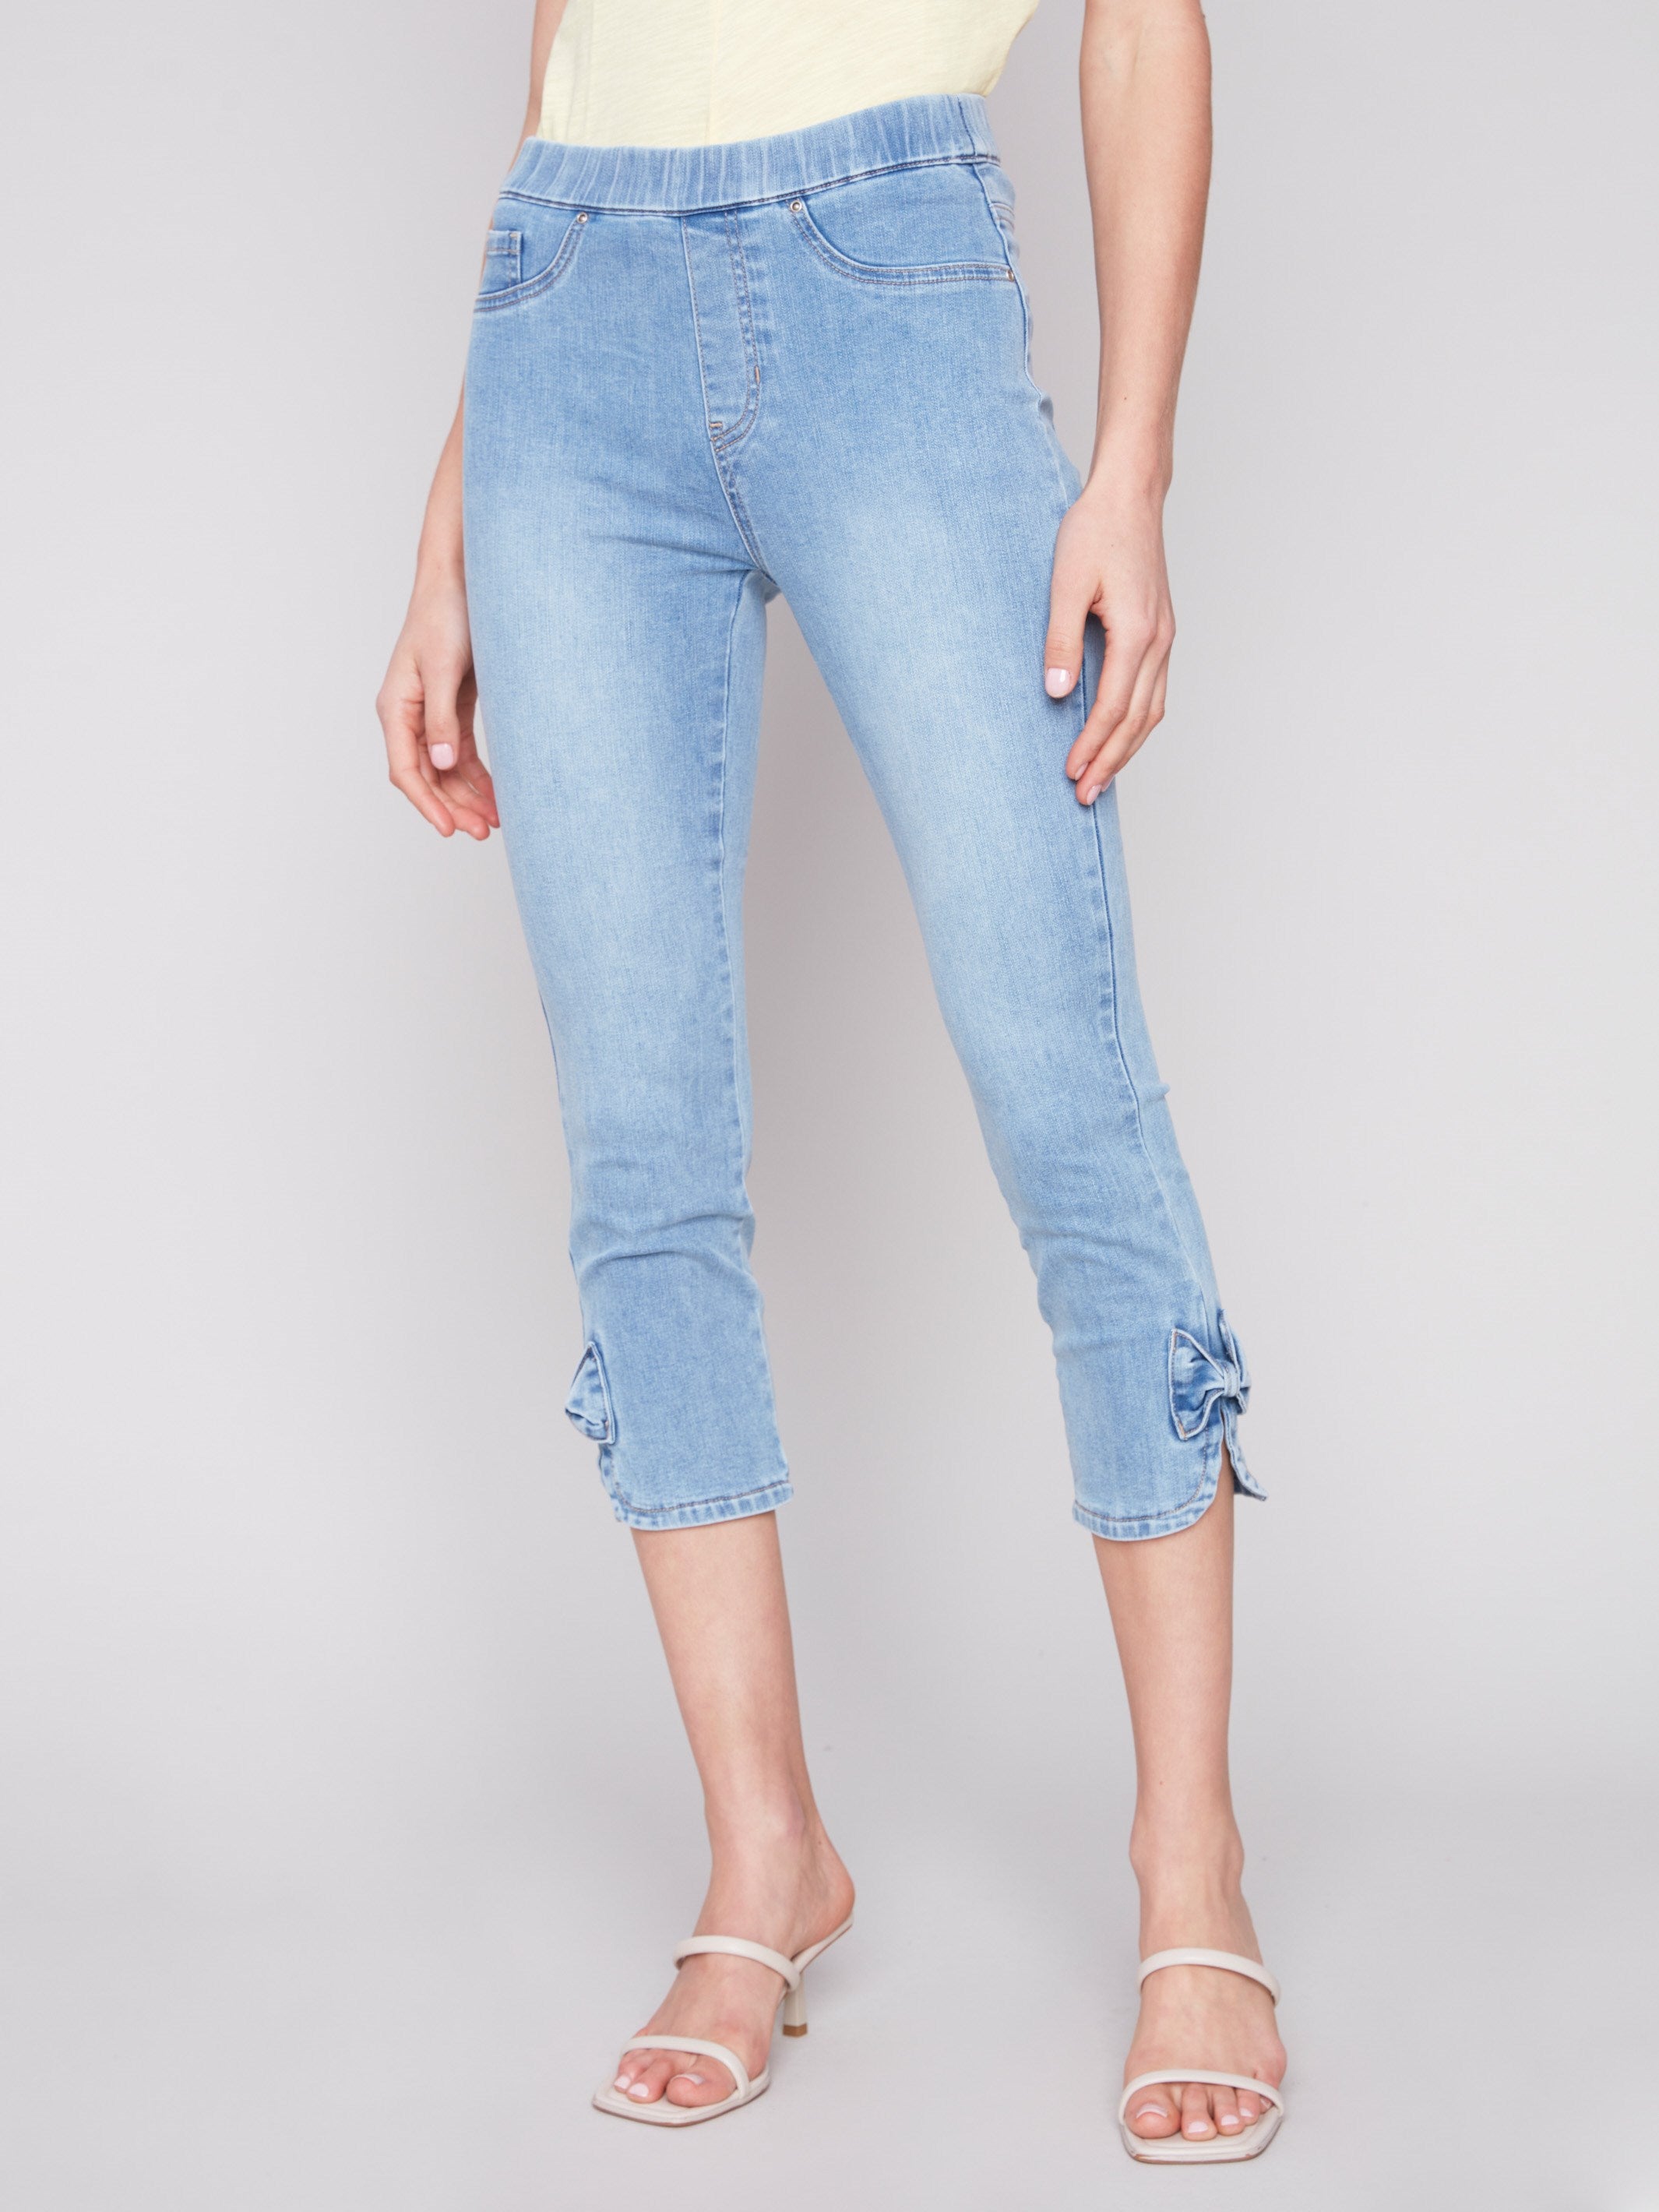 Charlie B Pull-On Jeans with Bow Detail - Light Blue - Image 2